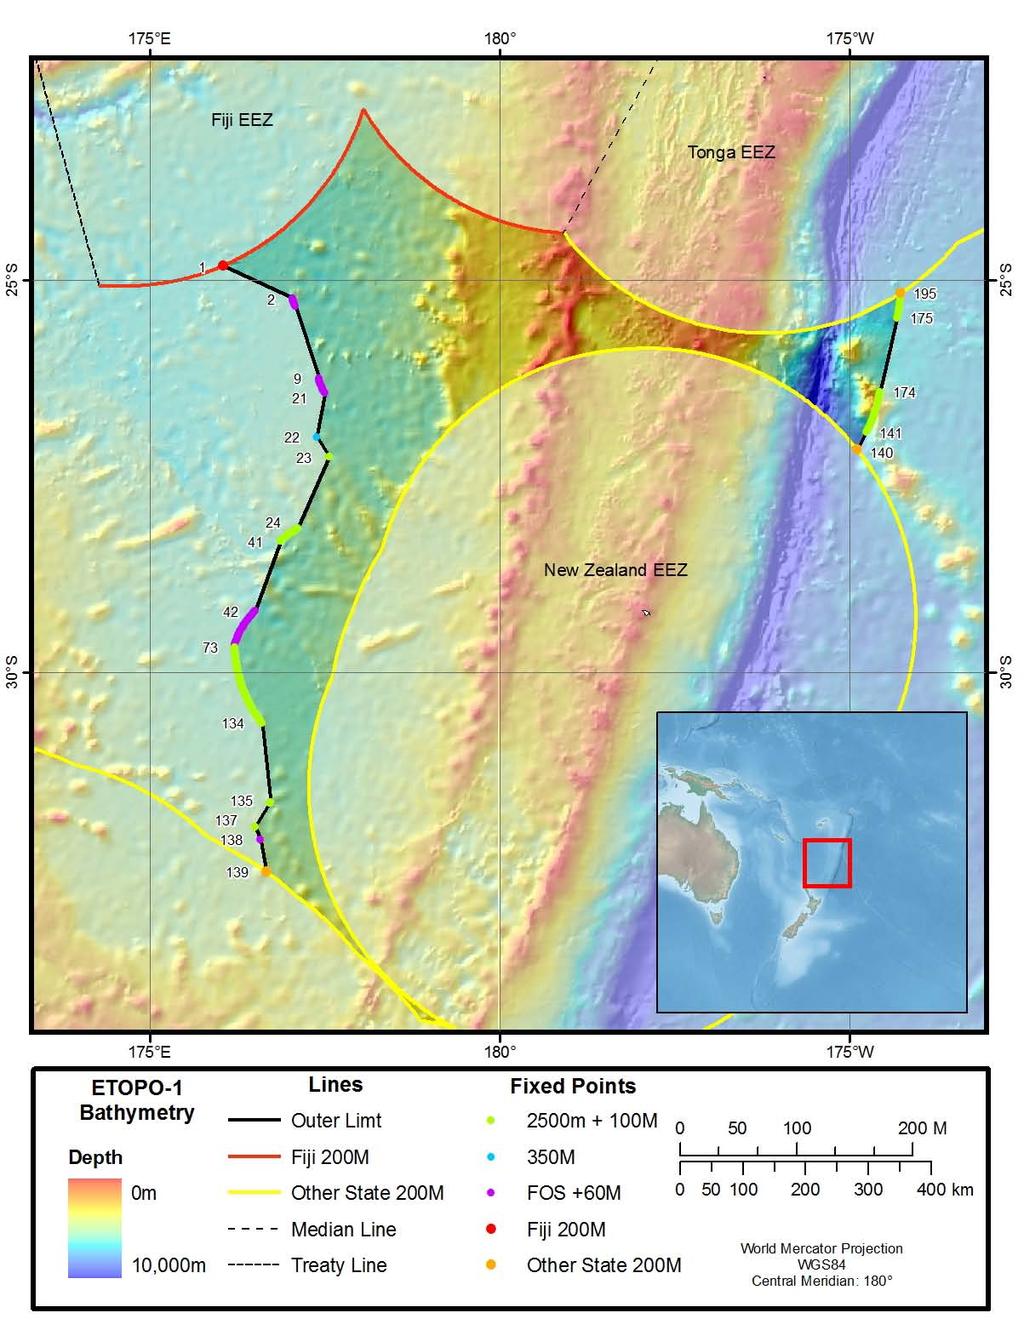 Figure 1: The outer limit of the continental shelf of the Republic of the Fiji